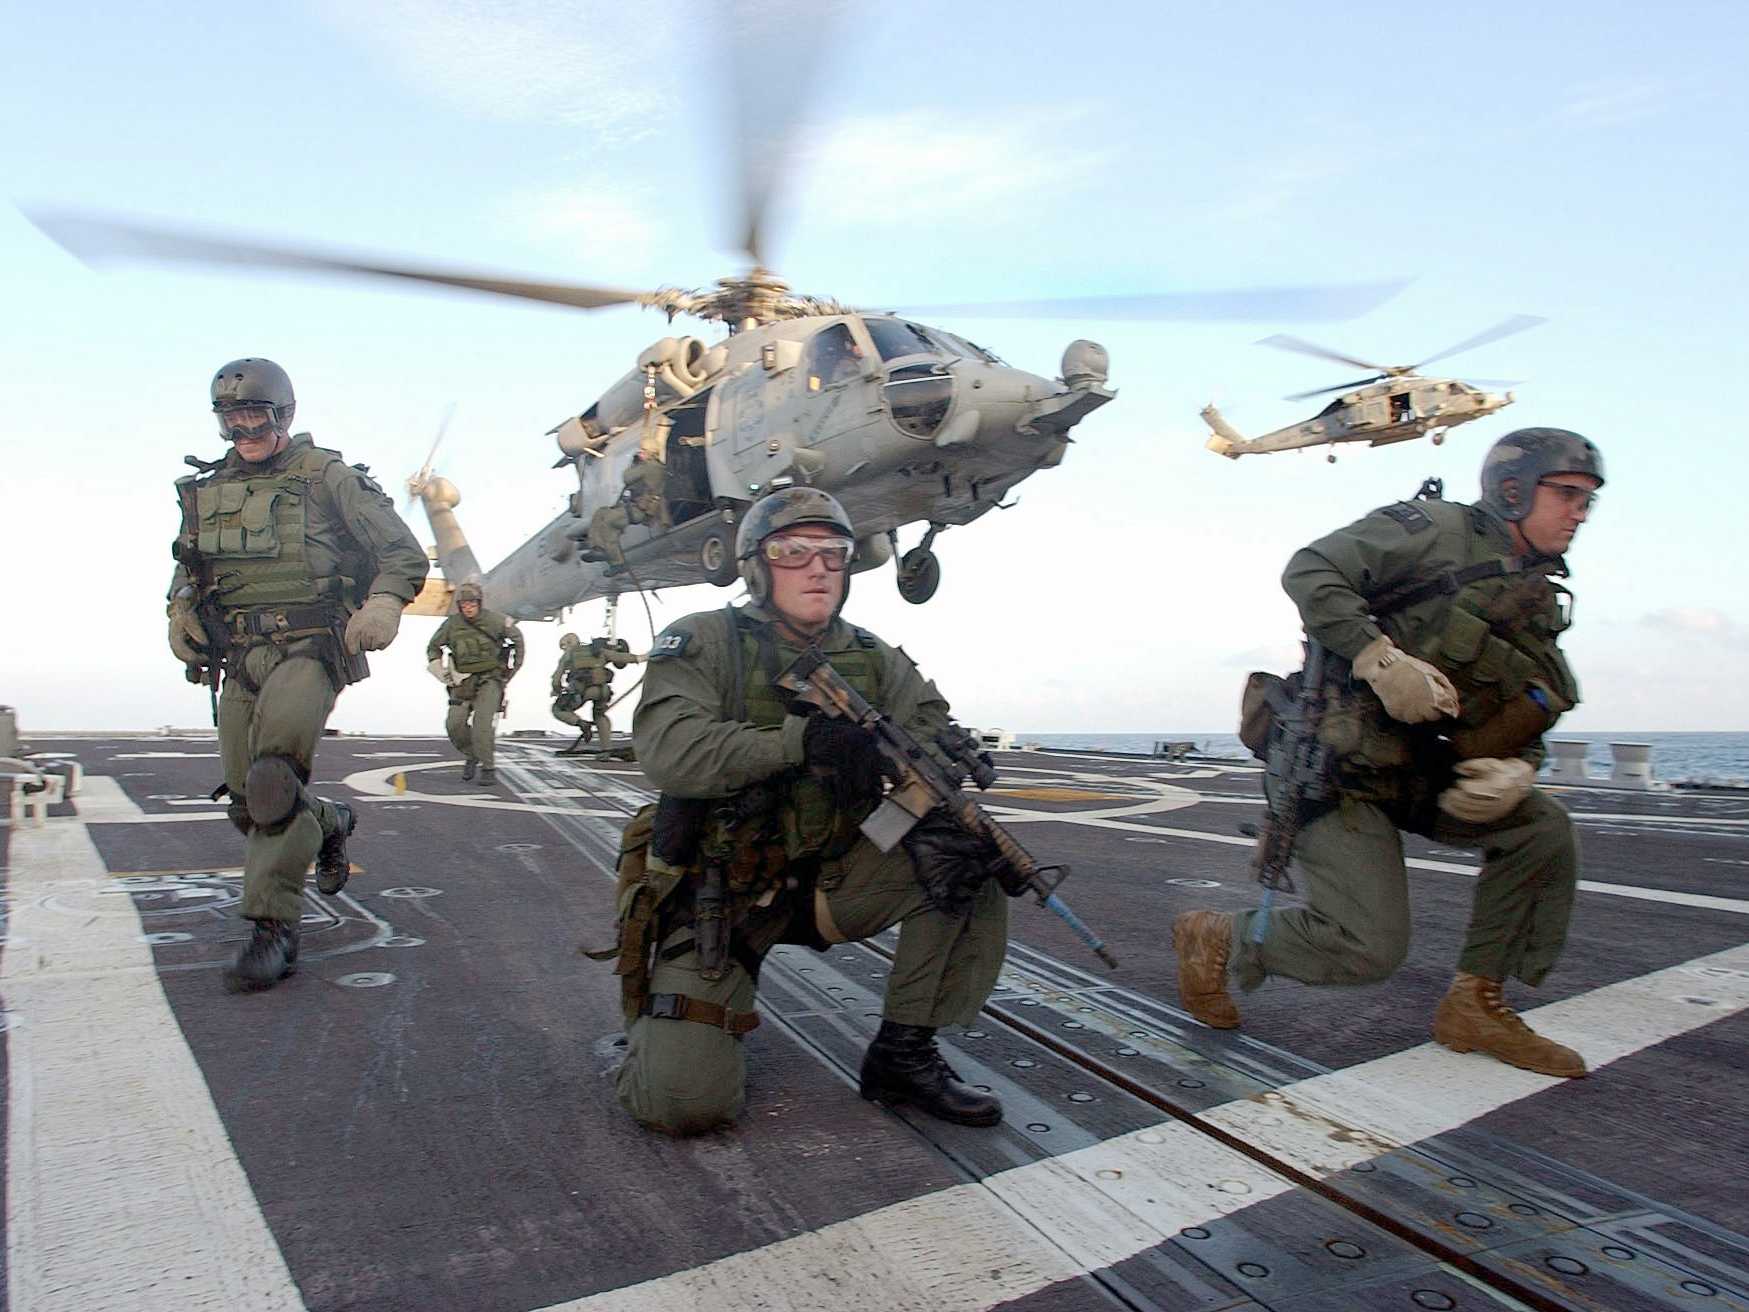  wwwbusinessinsidercomnavy seals seize a ship in just minutes